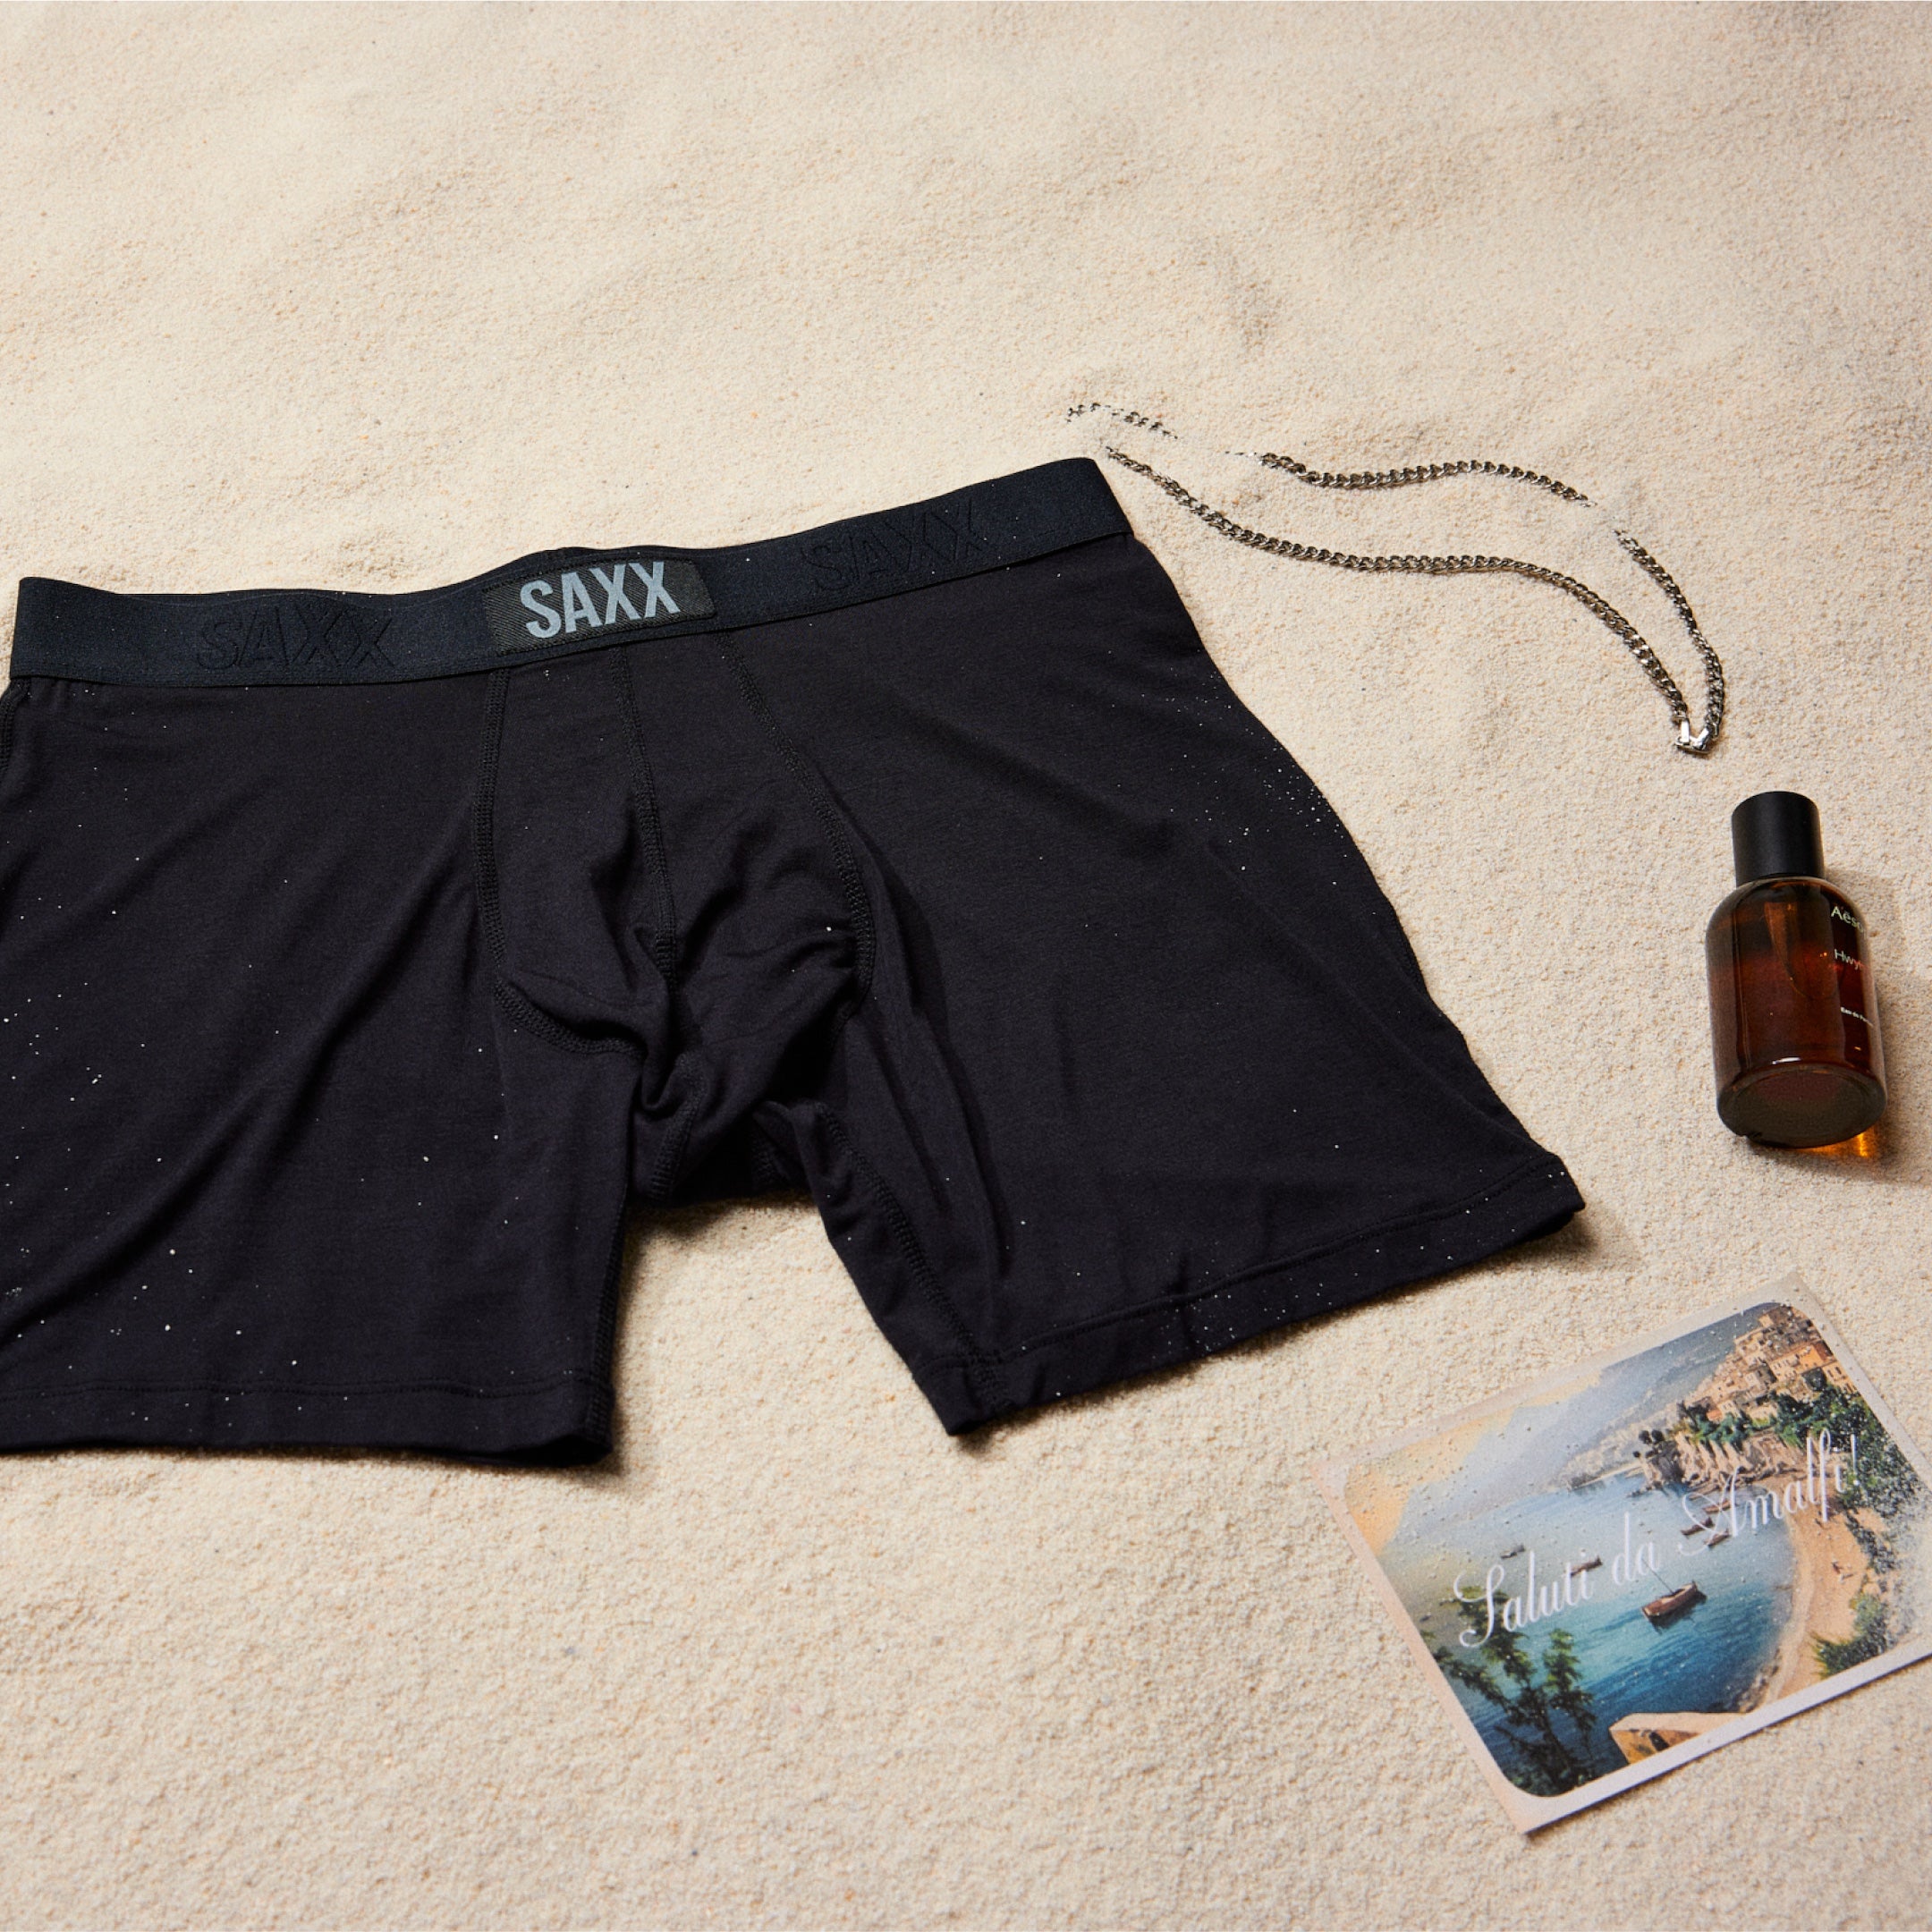 Black SAXX Boxer Briefs laid flat on the sand surrounded by a silver necklace, a sunscreen bottle, and a postcard.